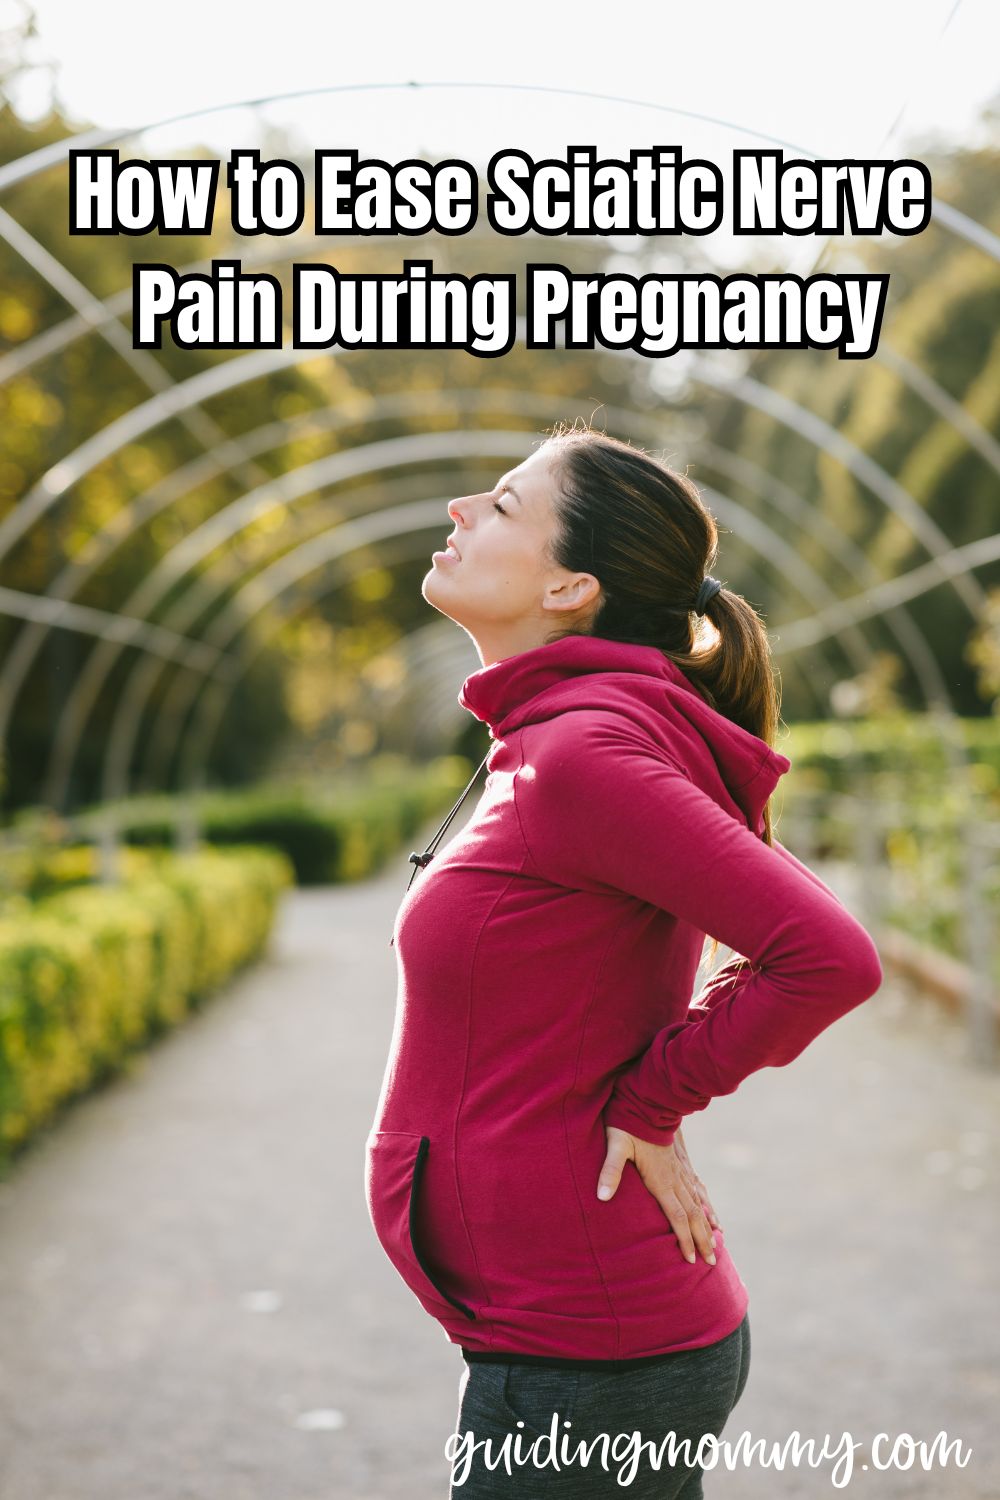 How to Ease Sciatic Nerve Pain During Pregnancy 